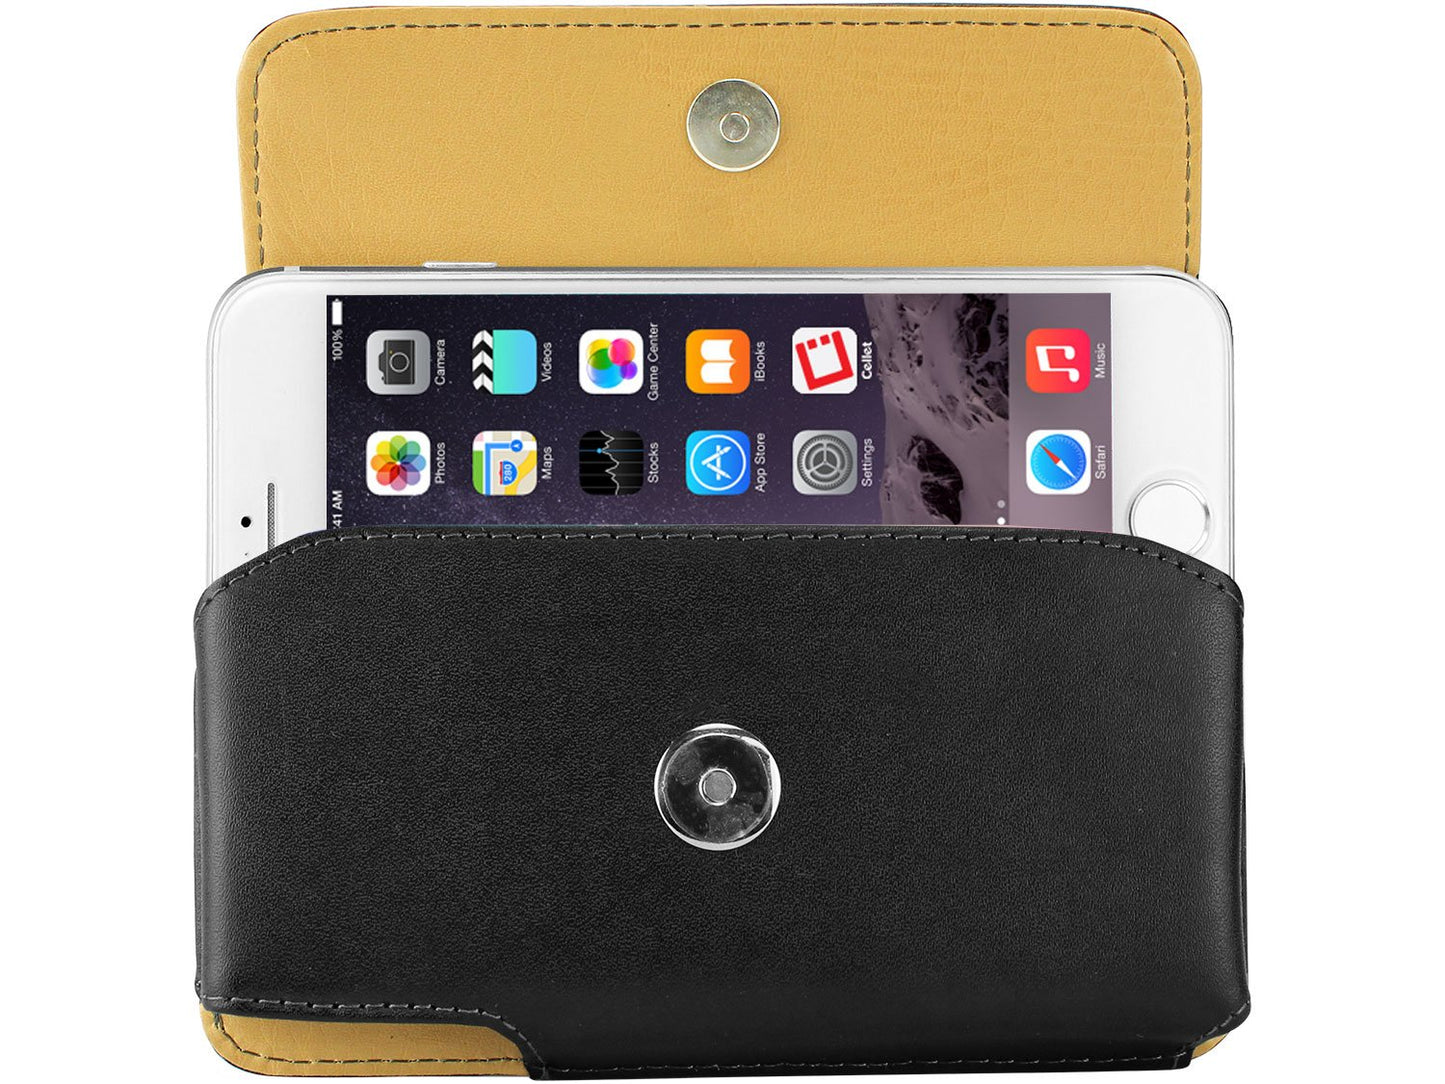 NOBLEP6 - Cellet Noble Premium Leather Case for Apple iPhone 6, iPhone 6s, iPhone 7 with Spring Clip